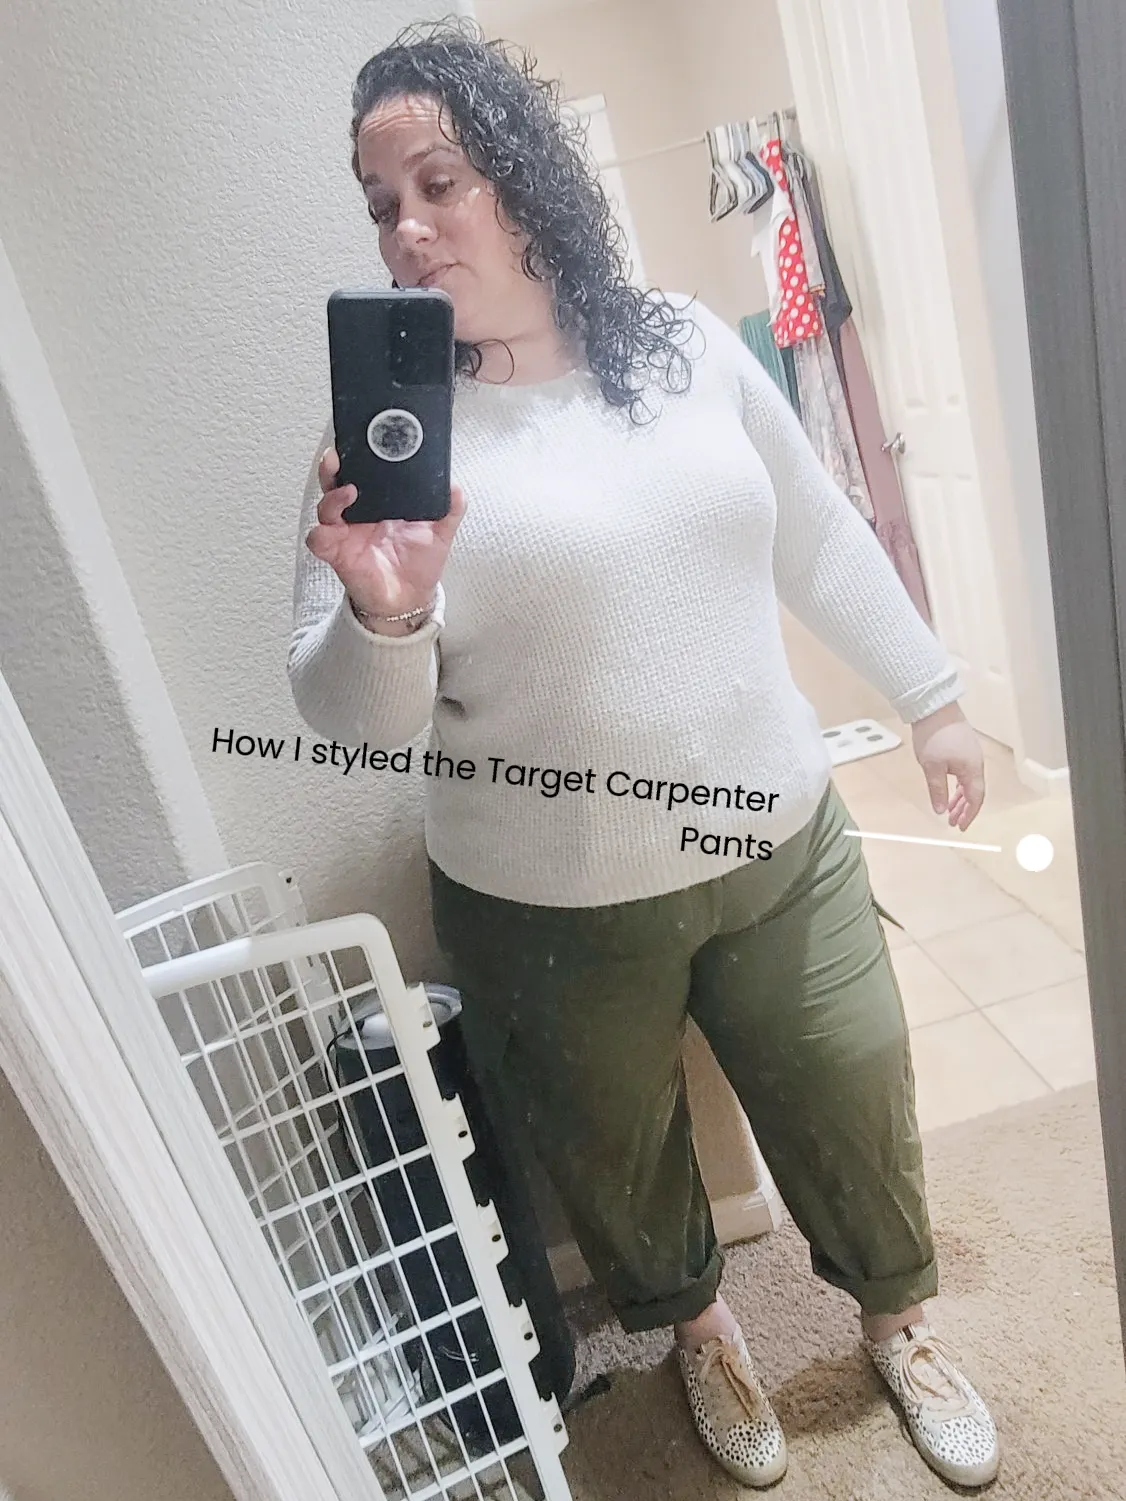 I'm plus-size and found a dupe for the Aritzia bodysuit at Target — I'm in  love